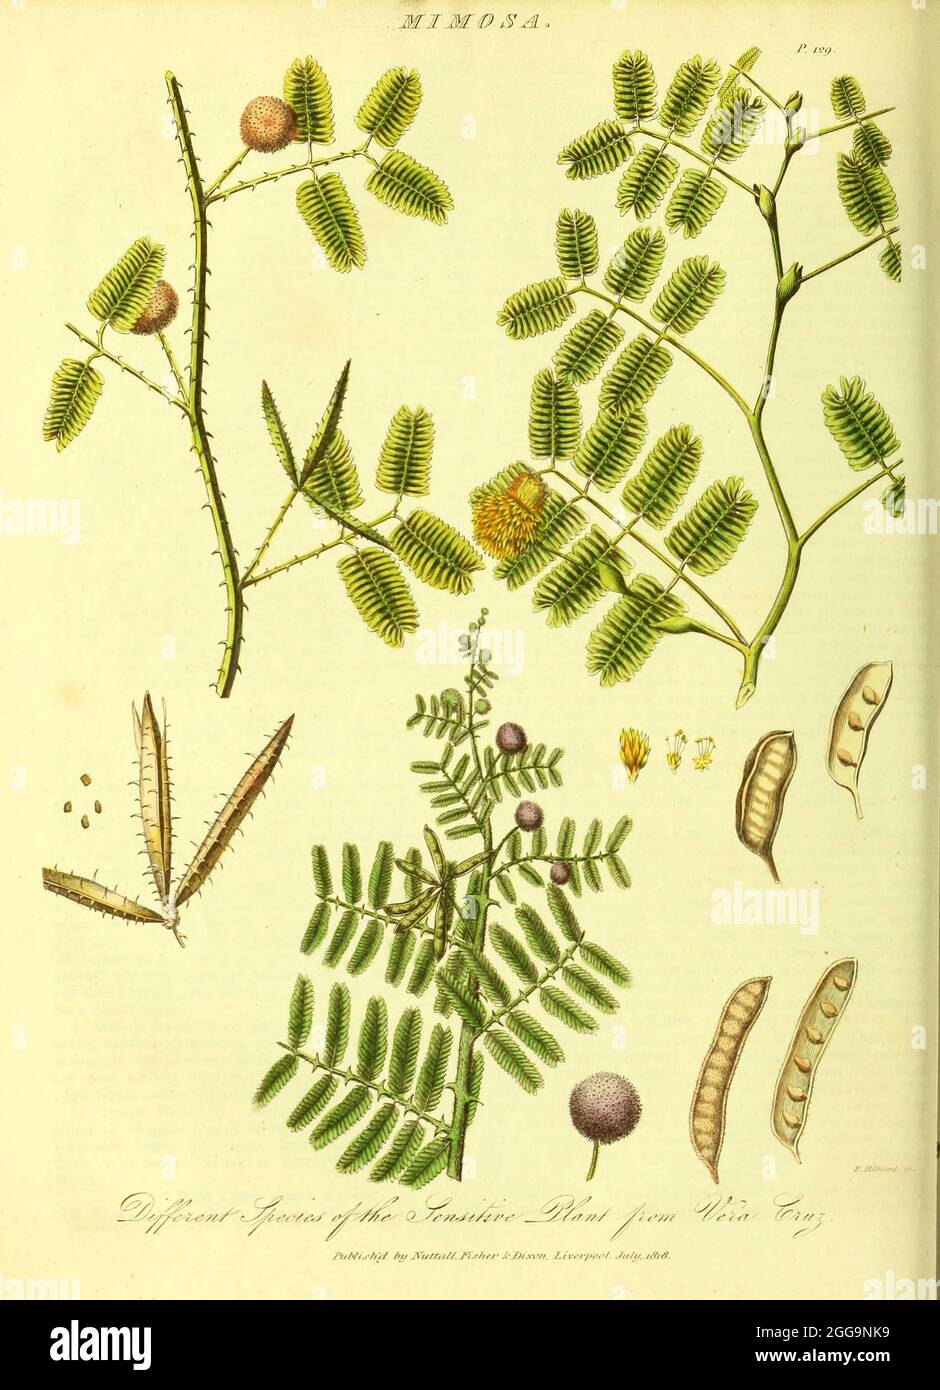 Mimosa from Vol II of the book The universal herbal : or botanical, medical and agricultural dictionary : containing an account of all known plants in the world, arranged according to the Linnean system. Specifying the uses to which they are or may be applied By Thomas Green,  Published in 1816 by Nuttall, Fisher & Co. in Liverpool and Printed at the Caxton Press by H. Fisher Stock Photo